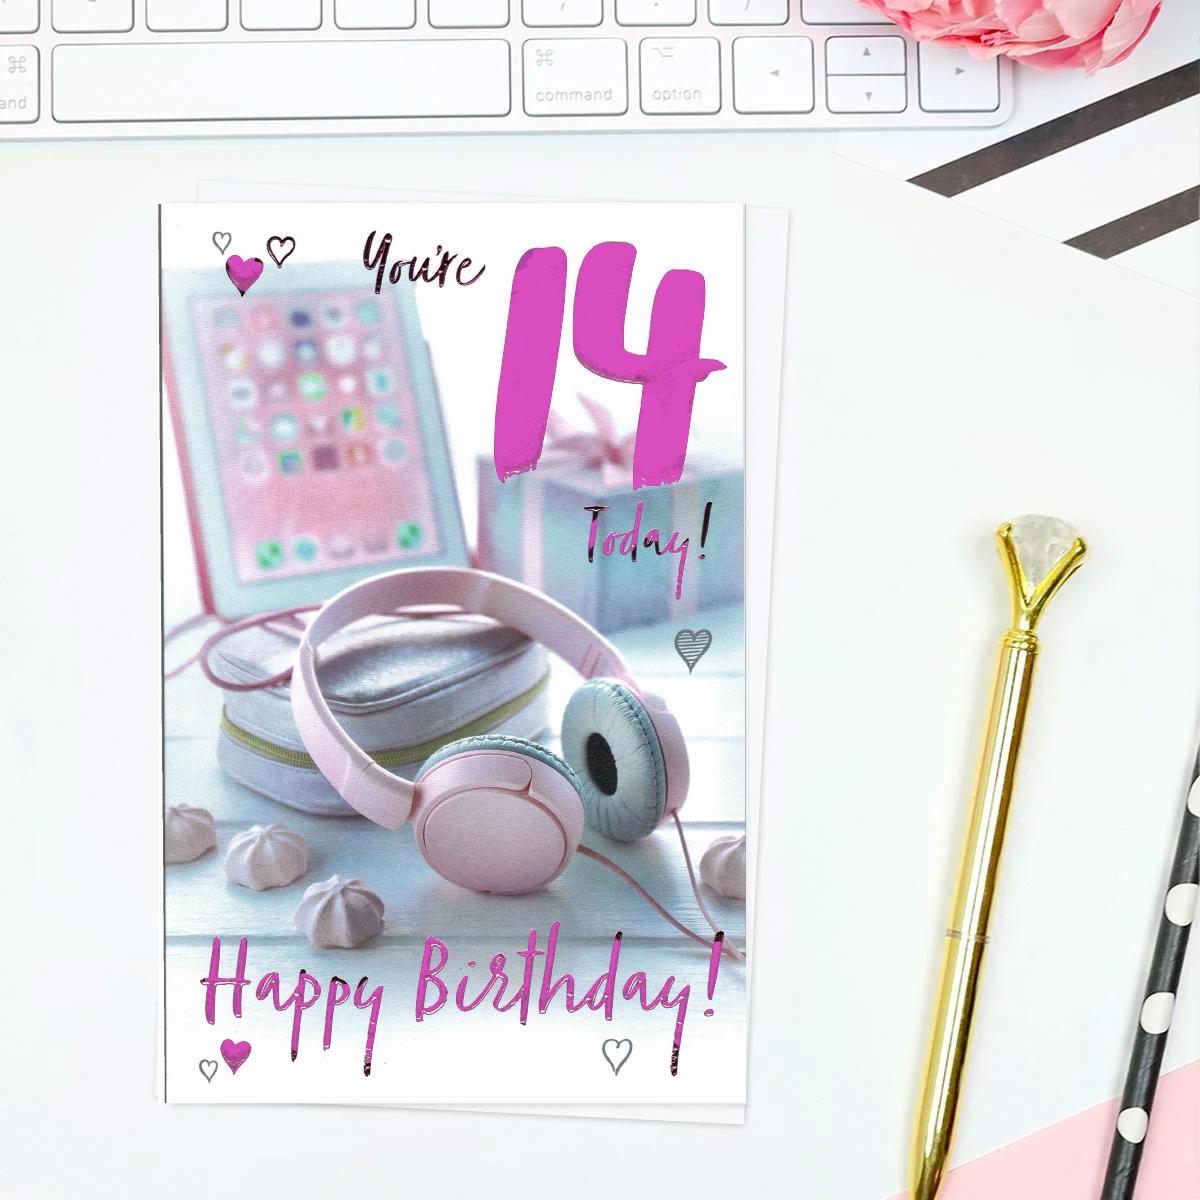 You're 14 Today Happy Birthday - Pink Headphones Card Front Image